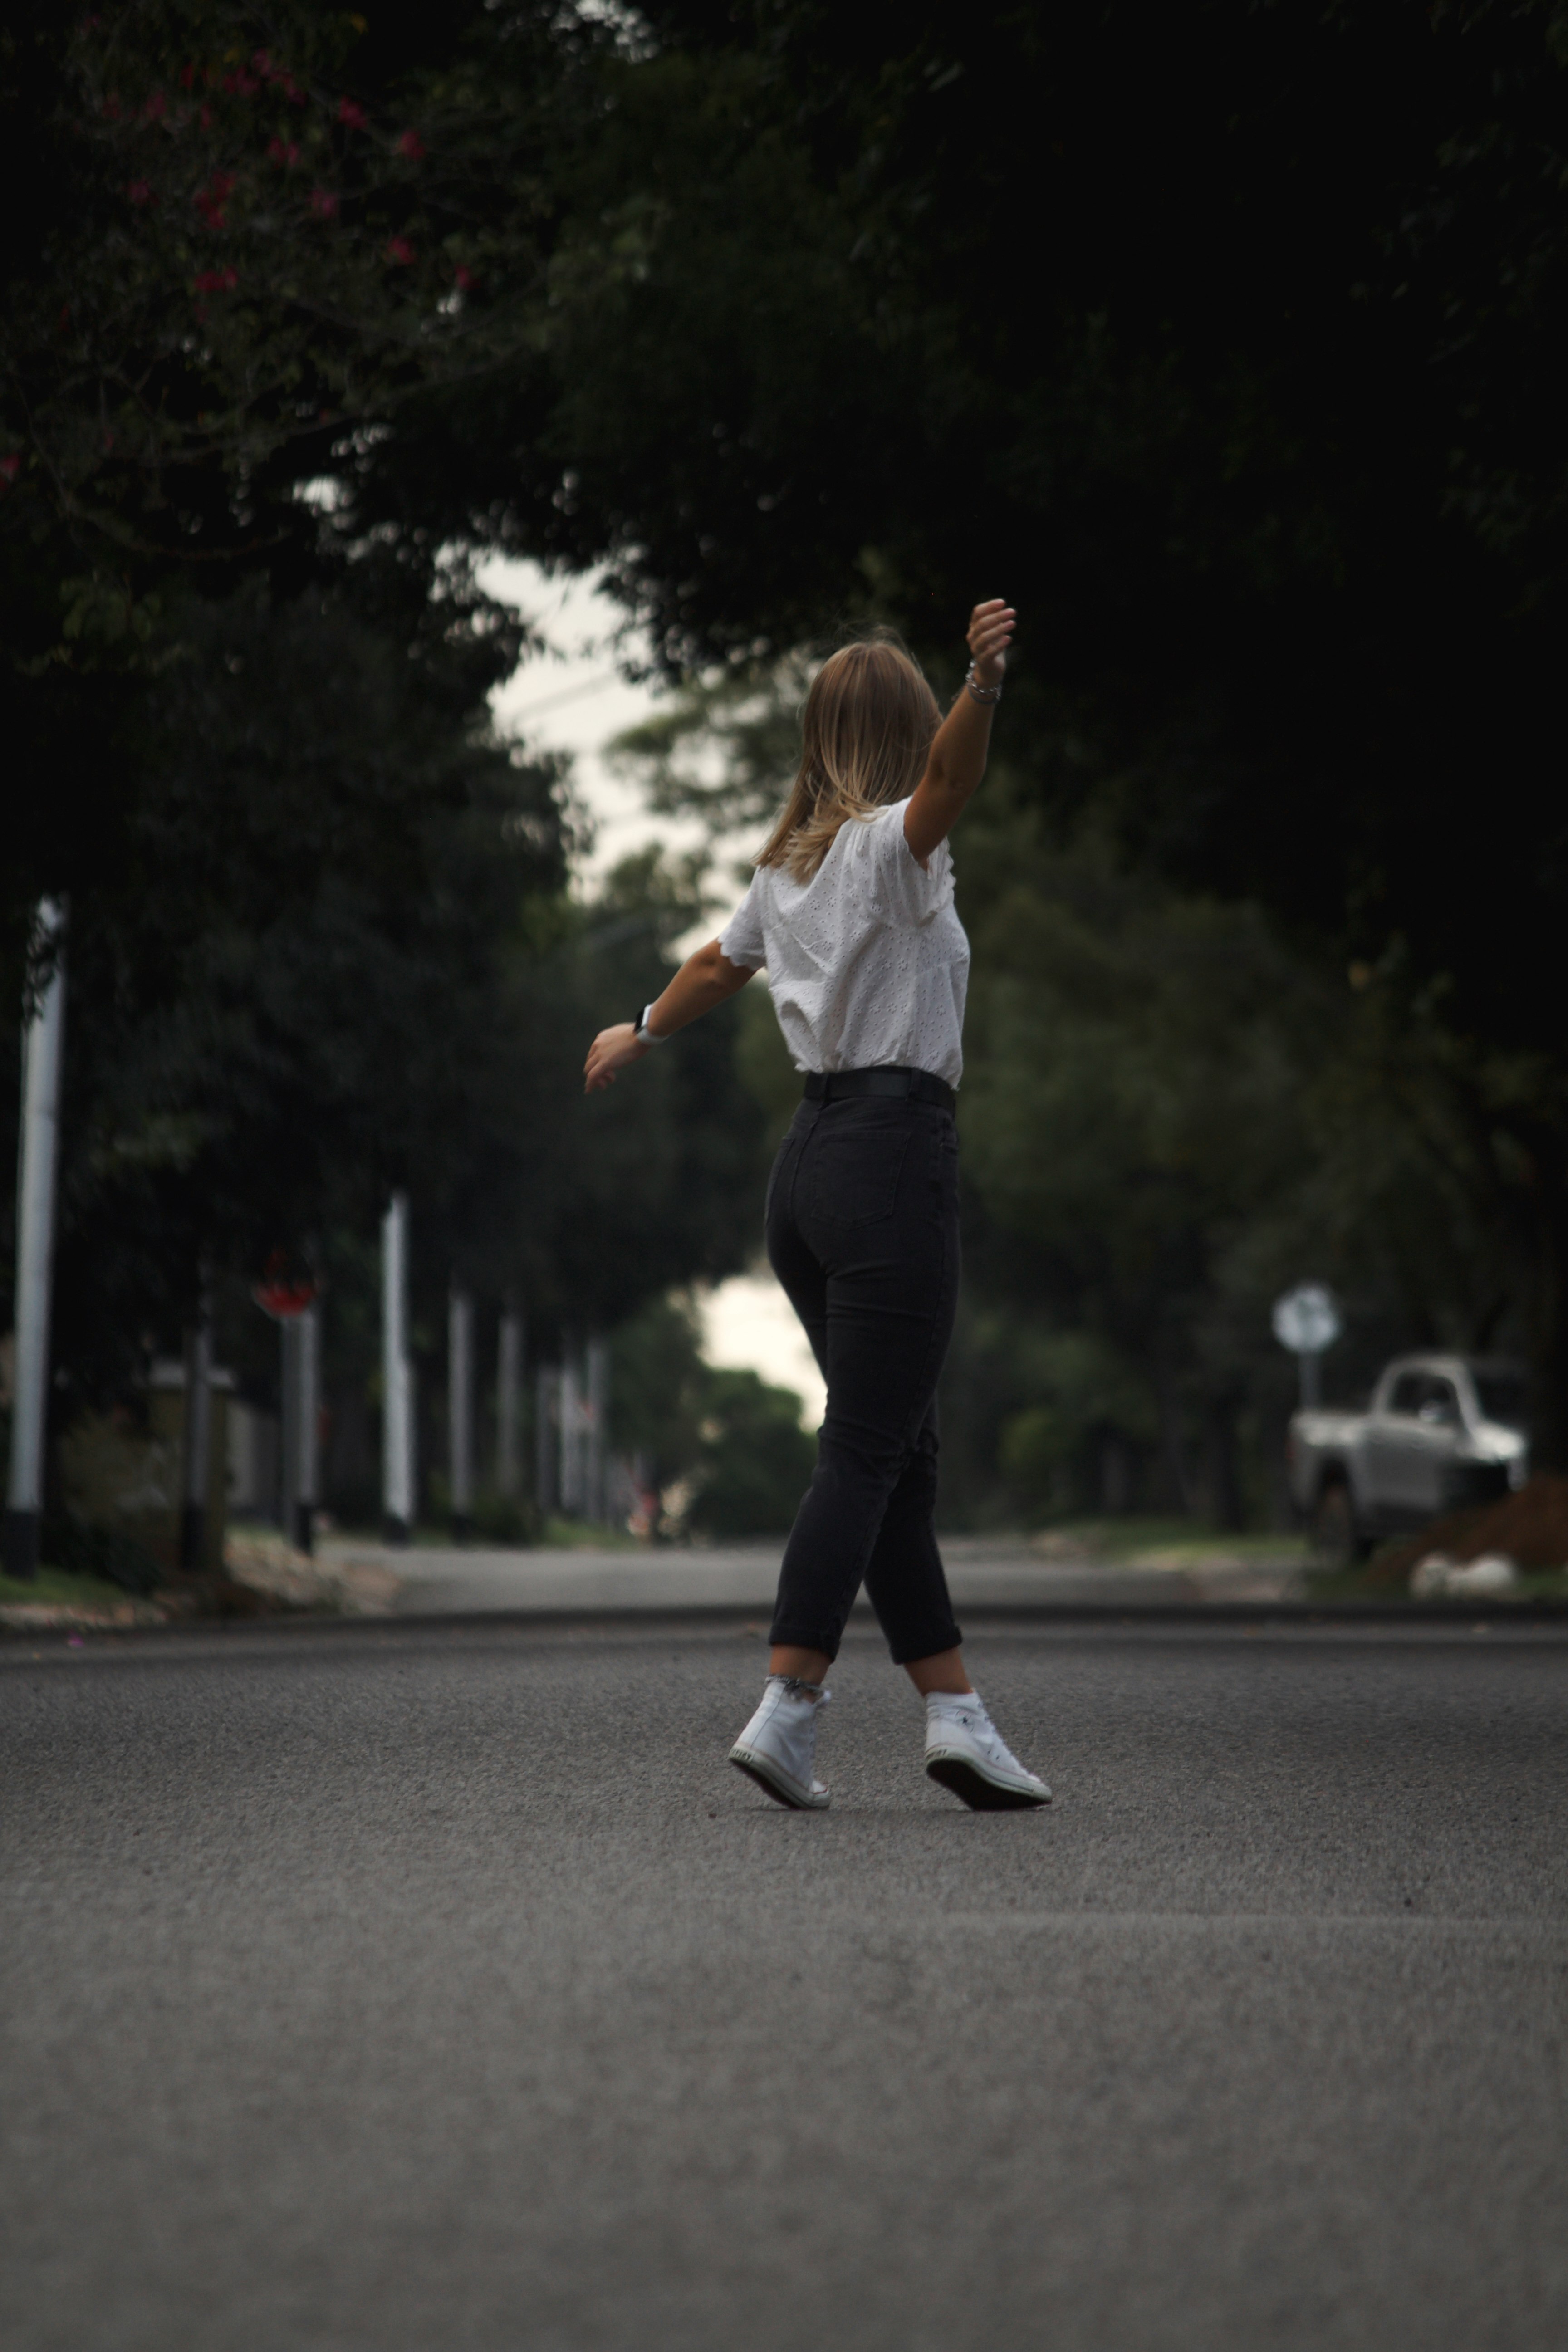 woman in white shirt and black pants running on road during daytime